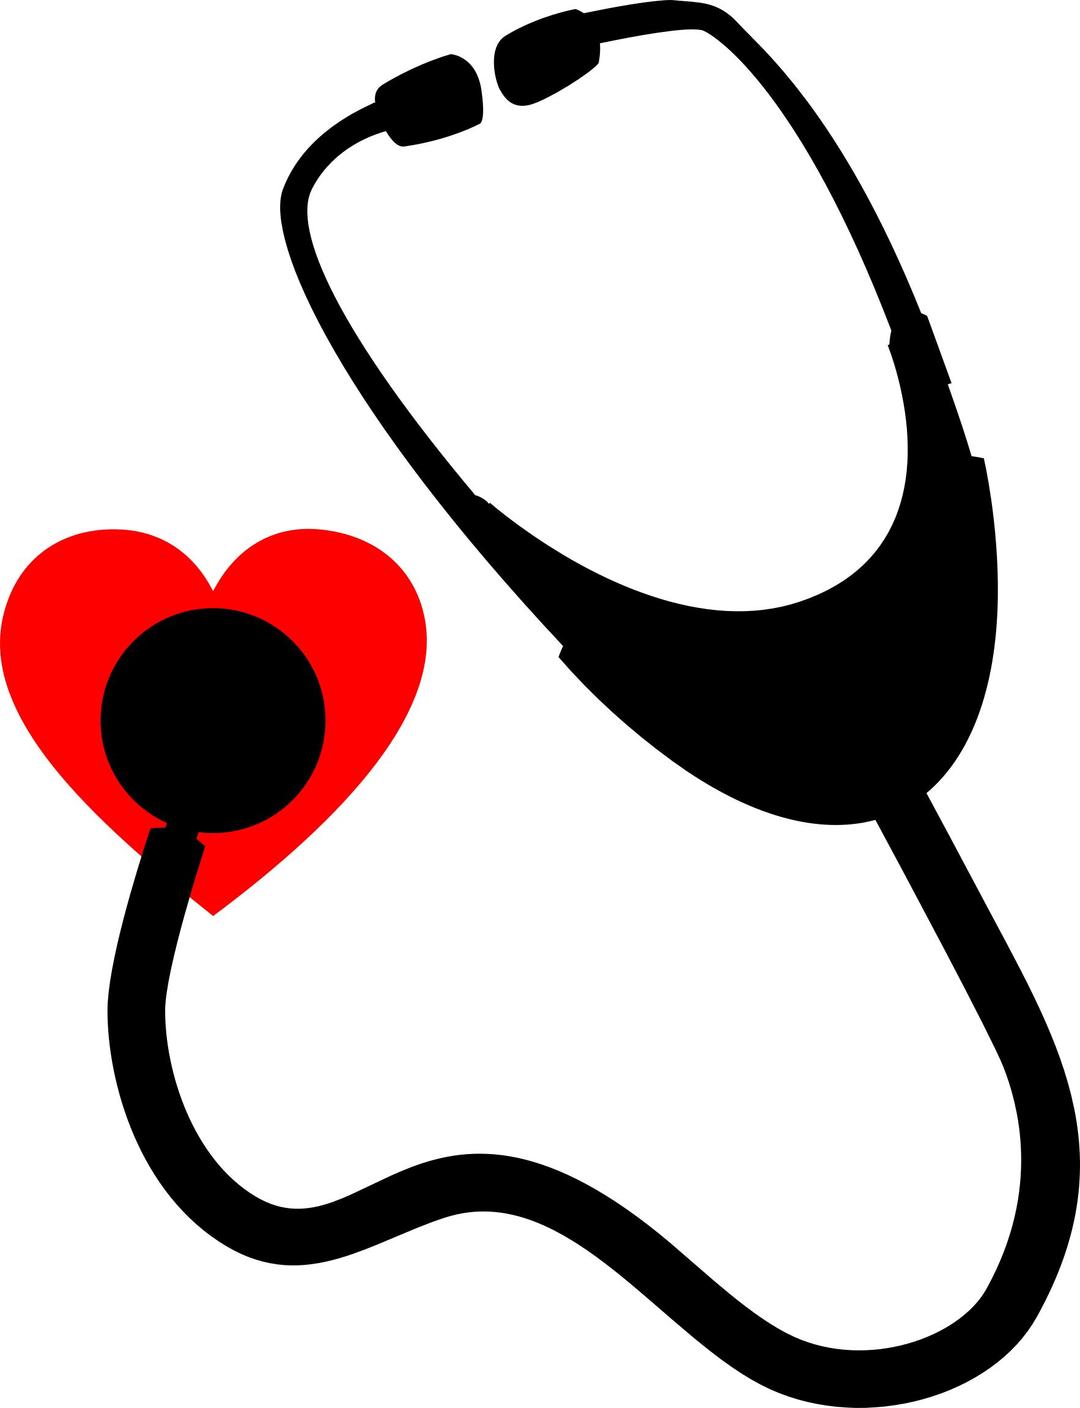 Heart Stethoscope png transparent